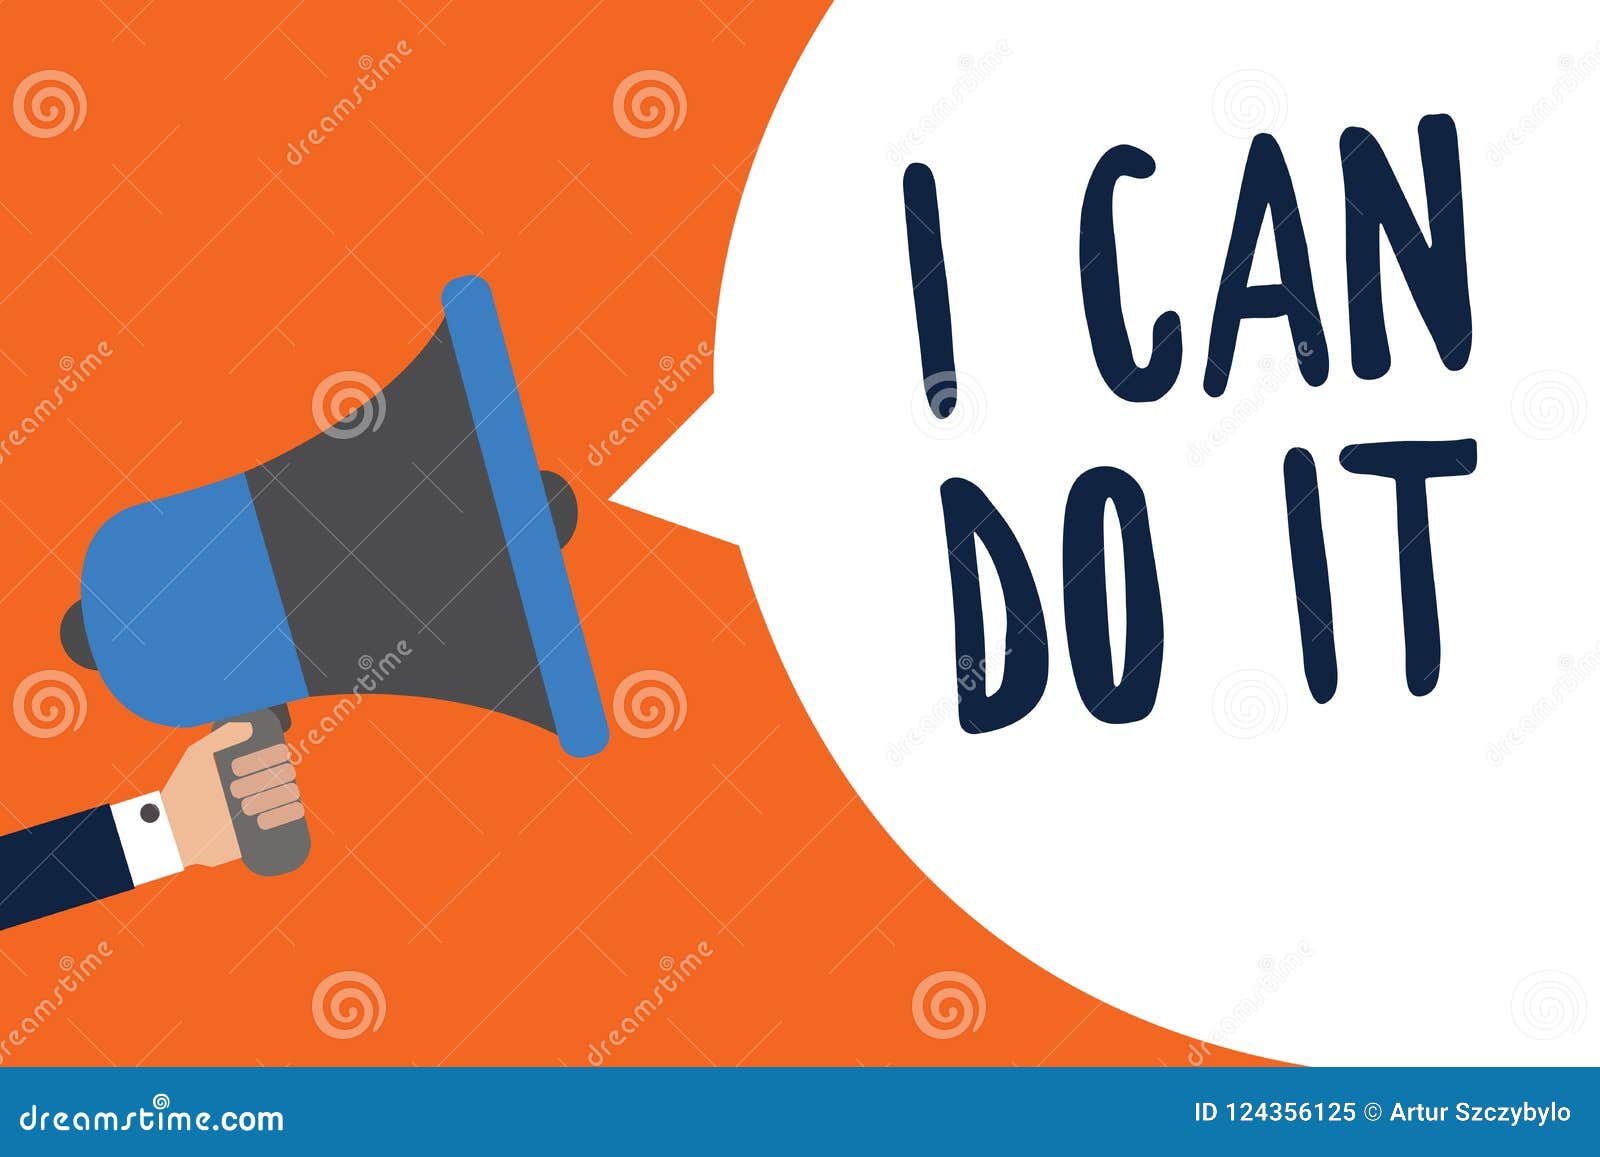 Handwriting Text I Can Do It Concept Meaning Ager Willingness To Accept And Meet Challenges Good Attitude Man Holding Megaphone L Stock Illustration Illustration Of Aspiration Cutting